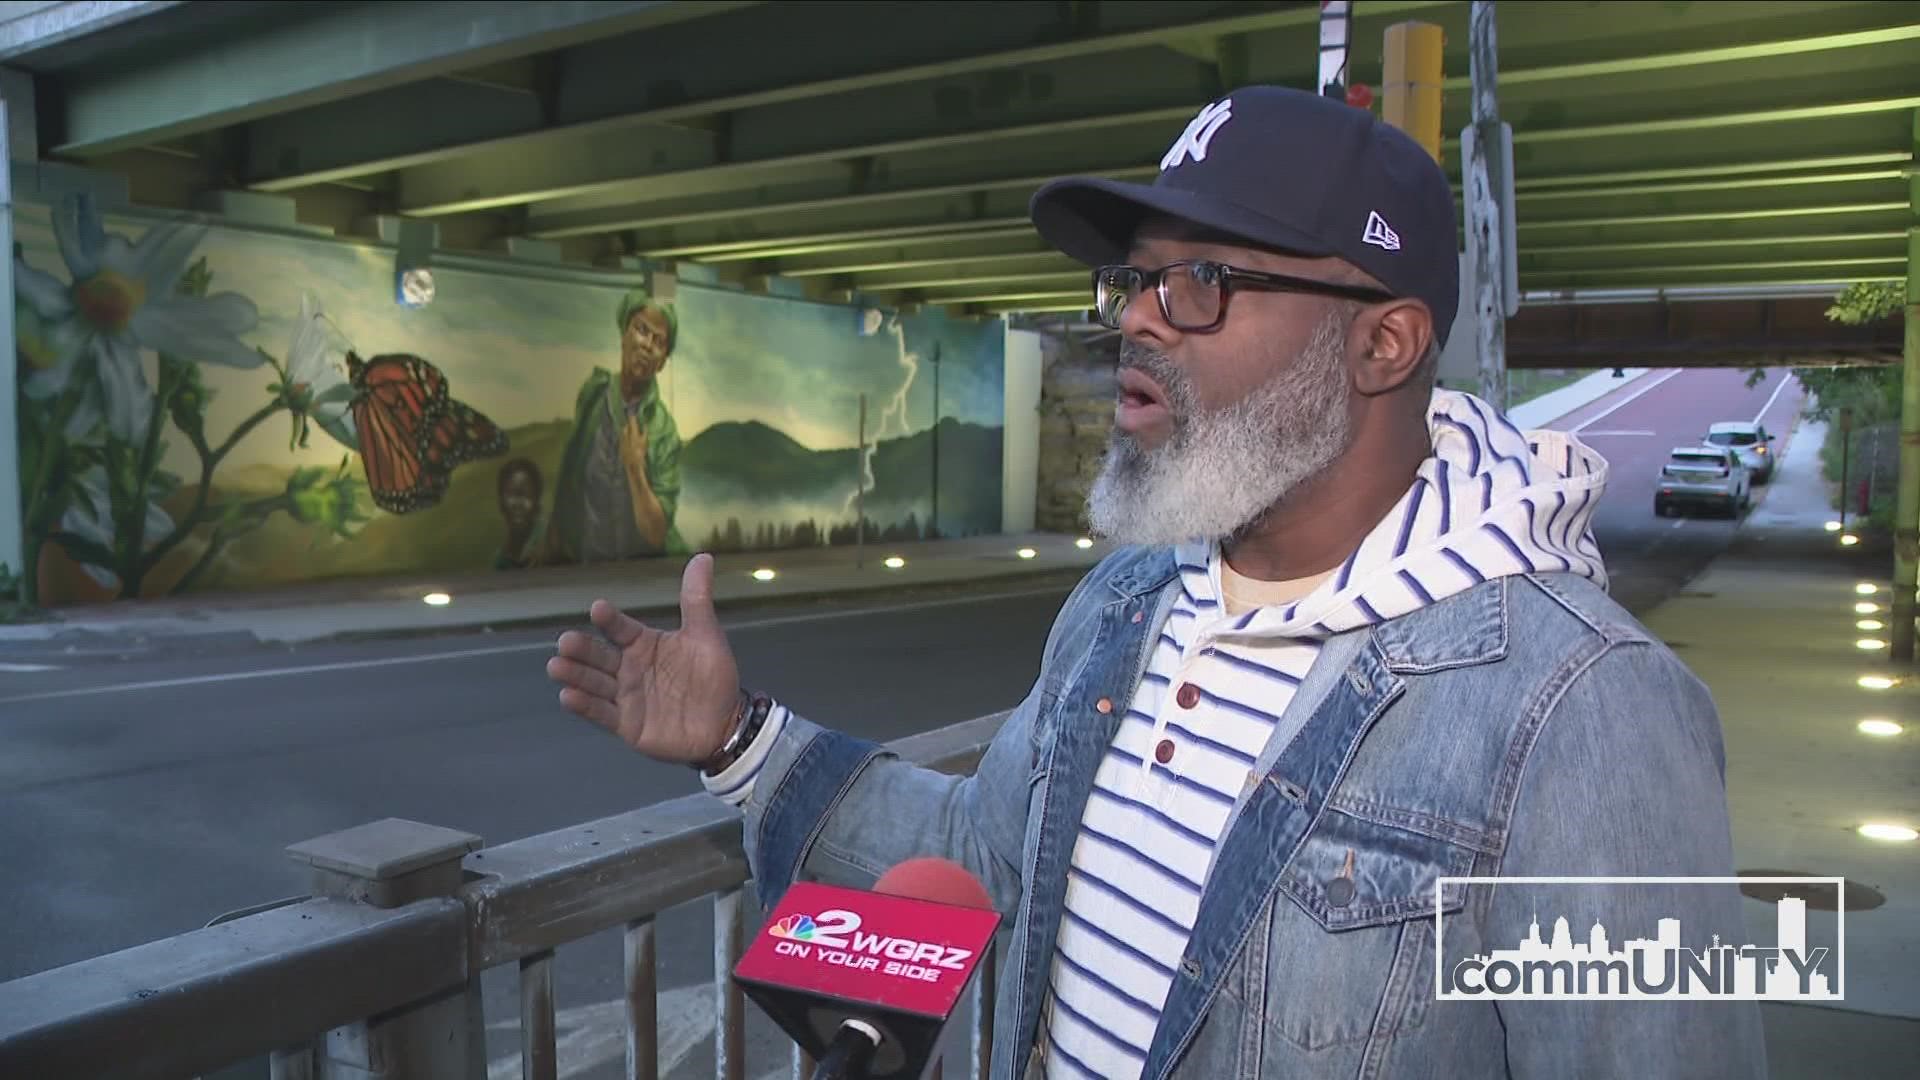 Gino Morrow completed a mural of Harriet Tubman, at the foot of Ferry. He talked about his vision for the mural, and what you won't see in it.